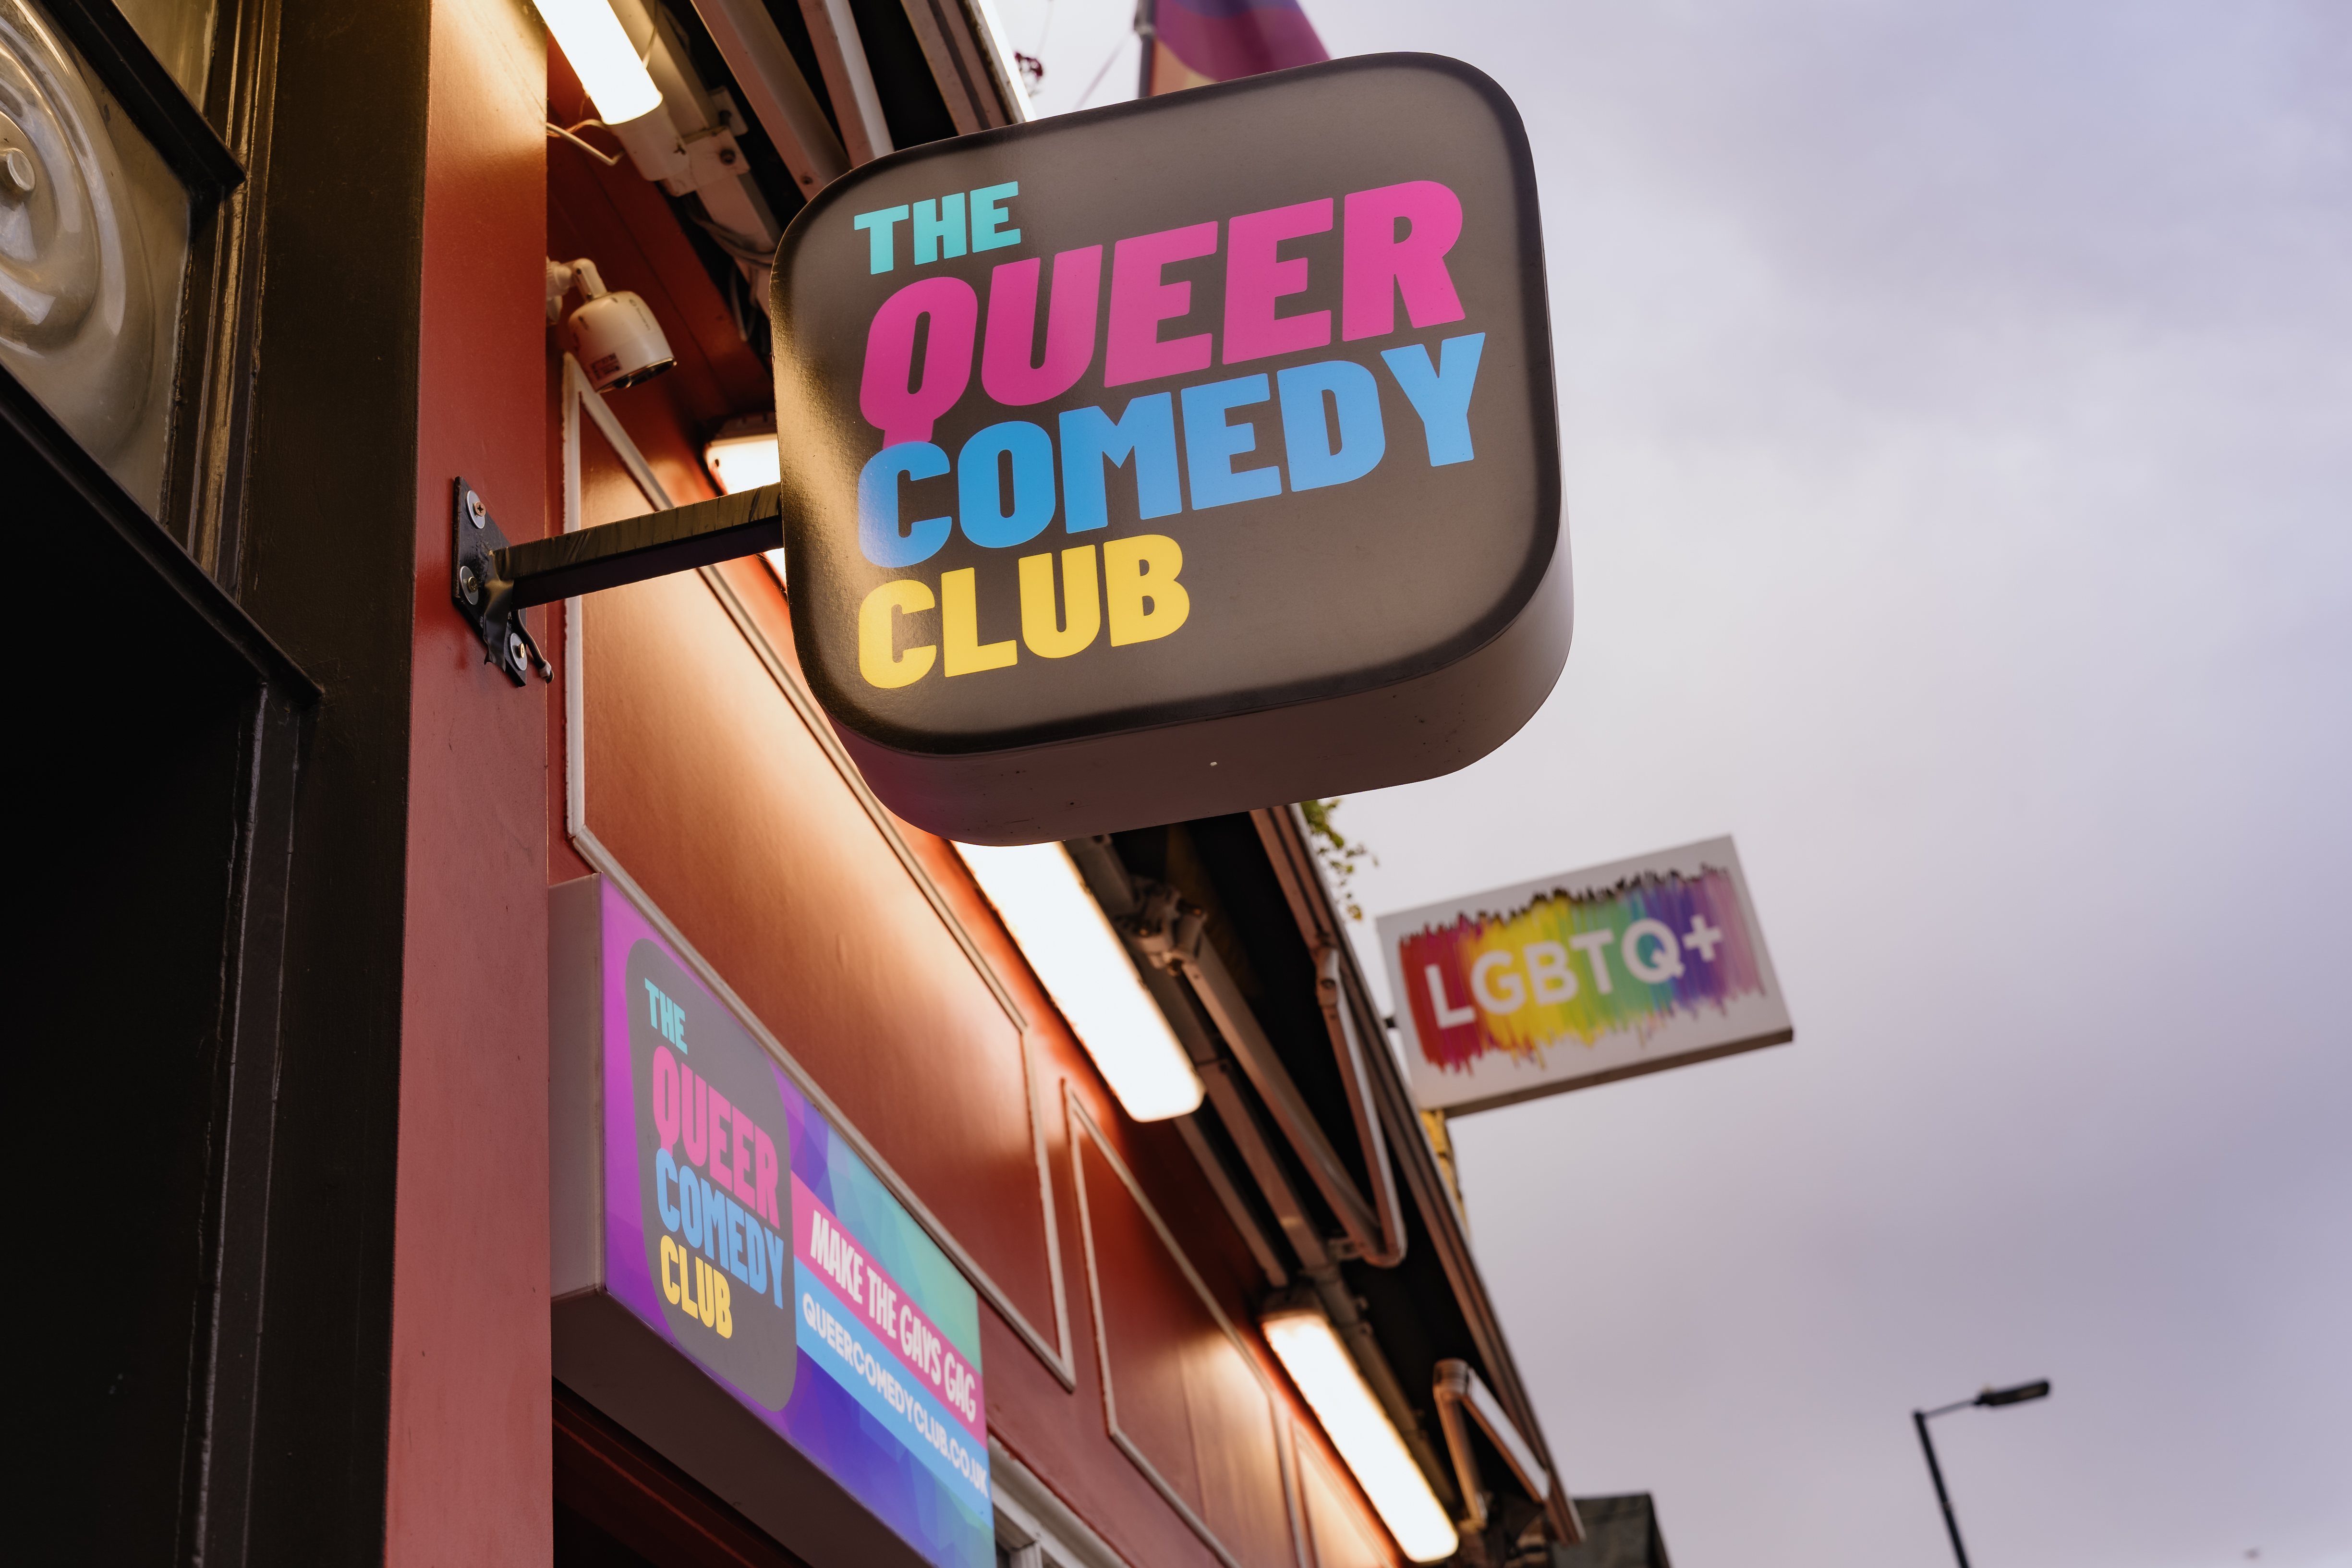 Ang Queer Comedy Club